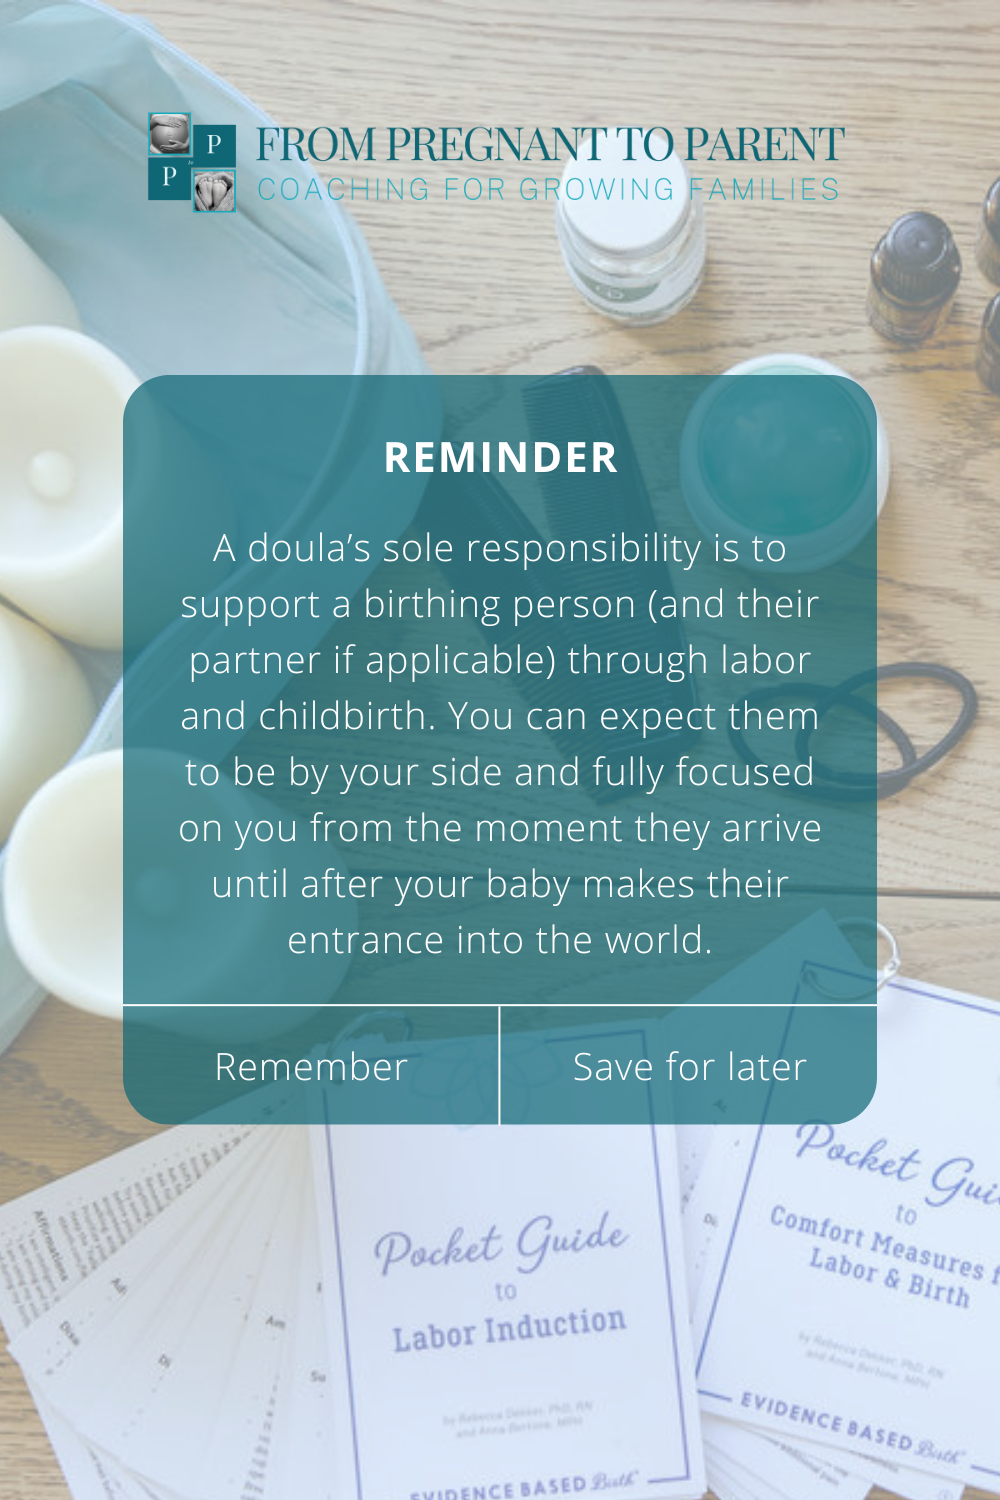 Reminder: A doula’s sole responsibility is to support a birthing person (and their partner if applicable) through labor and childbirth. You can expect them to be by your side and fully focused on you from the moment they arrive until after your baby makes their entrance into the world.